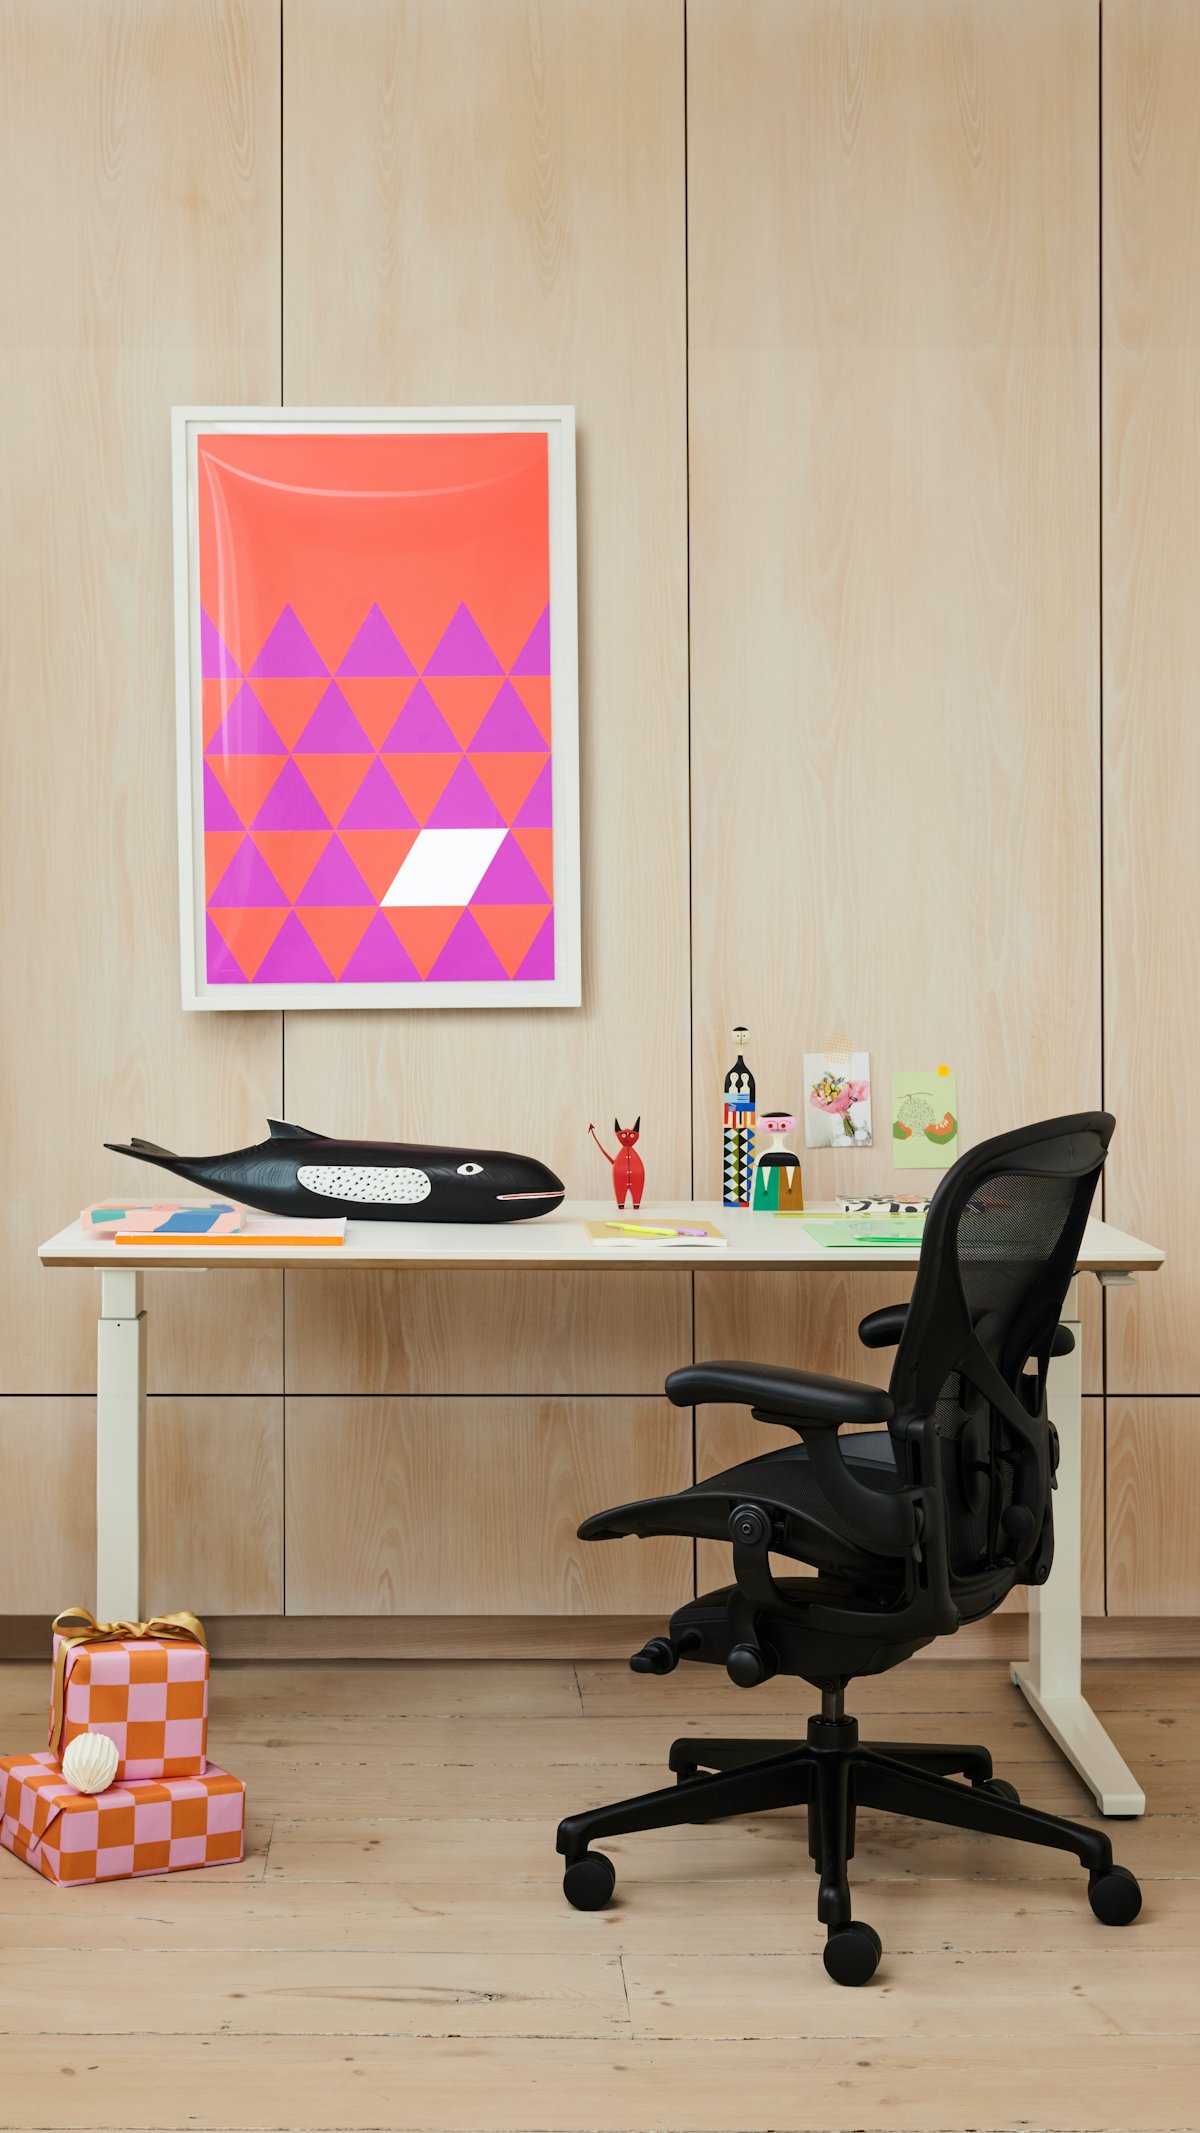 Eames Lounge Chair and Ottoman,  Renew Desk,  Aeron Chair,  Eames House Whale,  Nelson Pop Art Triangles Poster